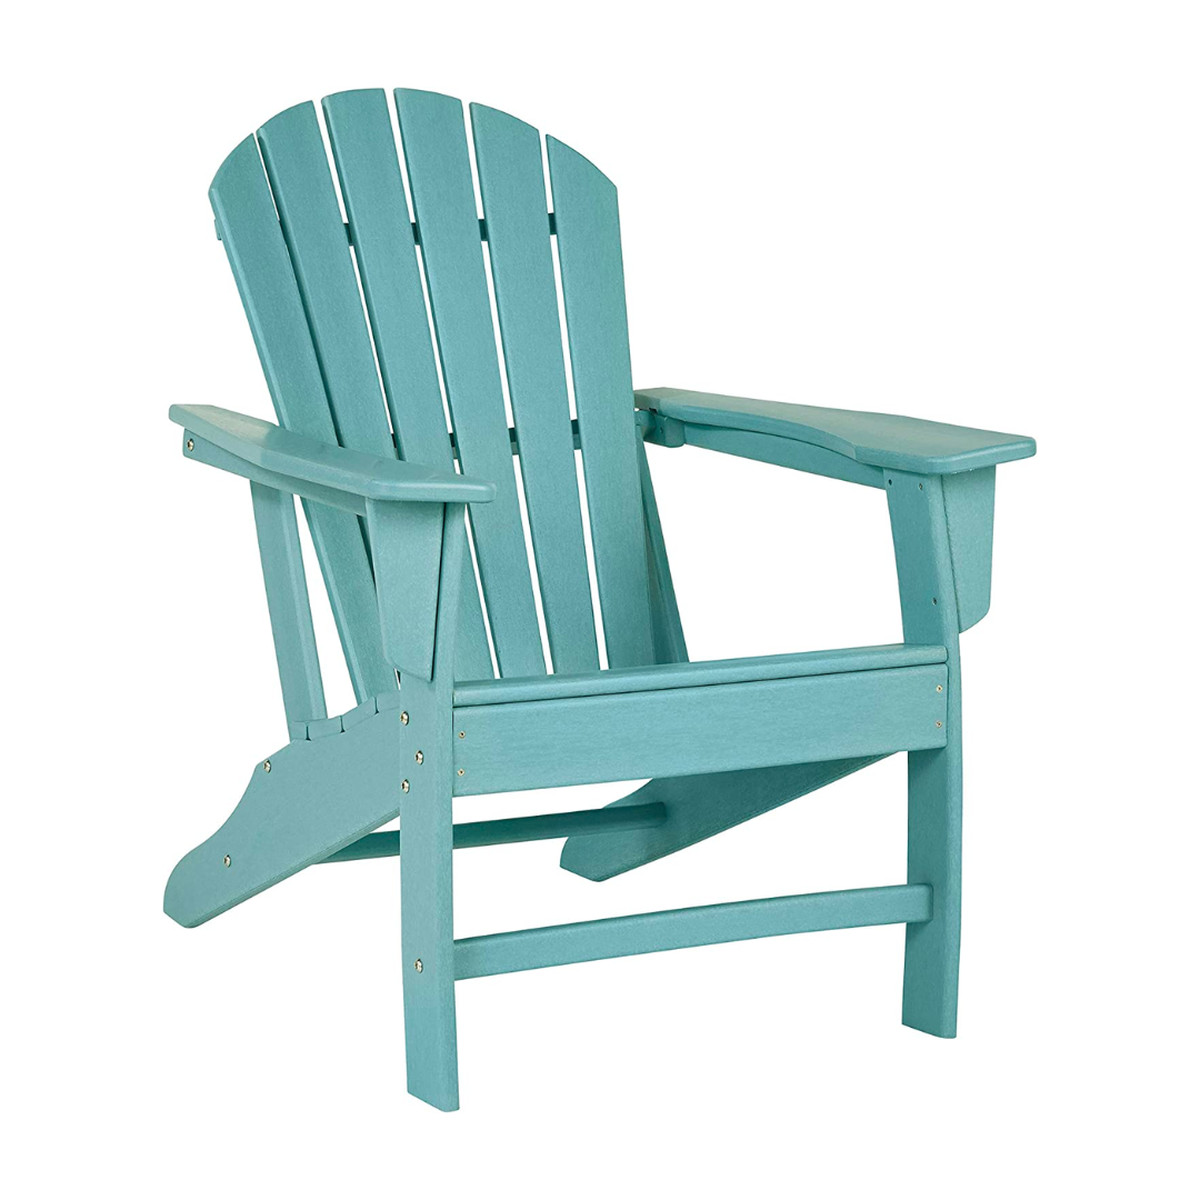 Turquoise outdoor patio Adirondack chair by Signature Design by Ashley